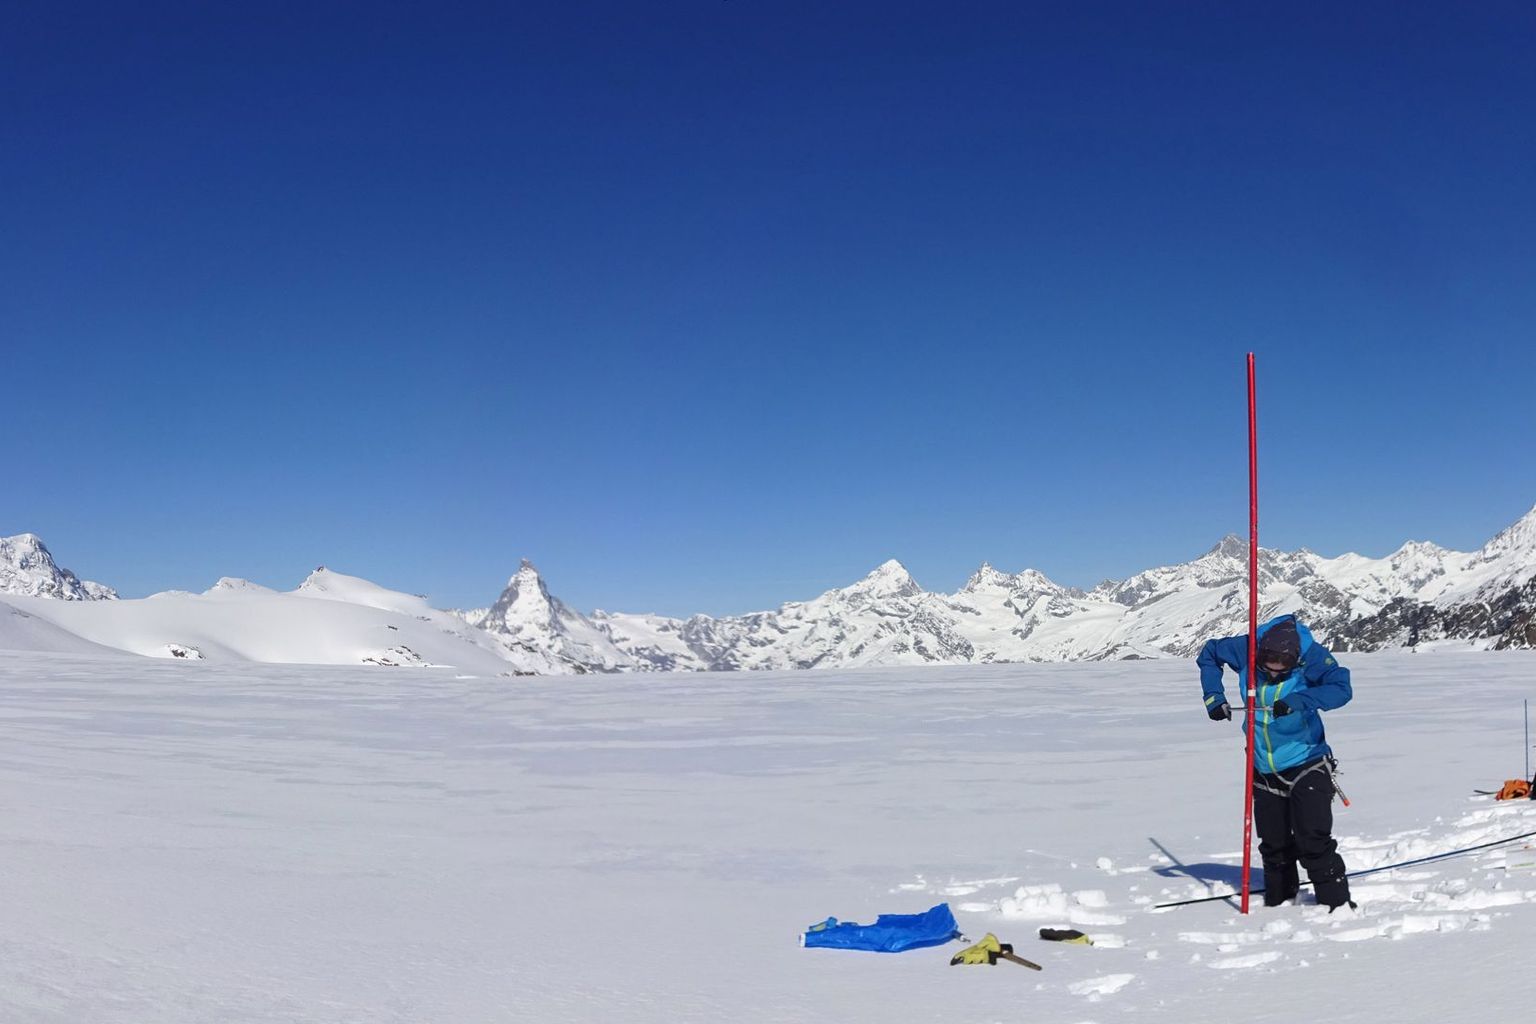 Snow density measurement at about 3300 metres above sea level on Findel Glacier (VS) in May 2020.